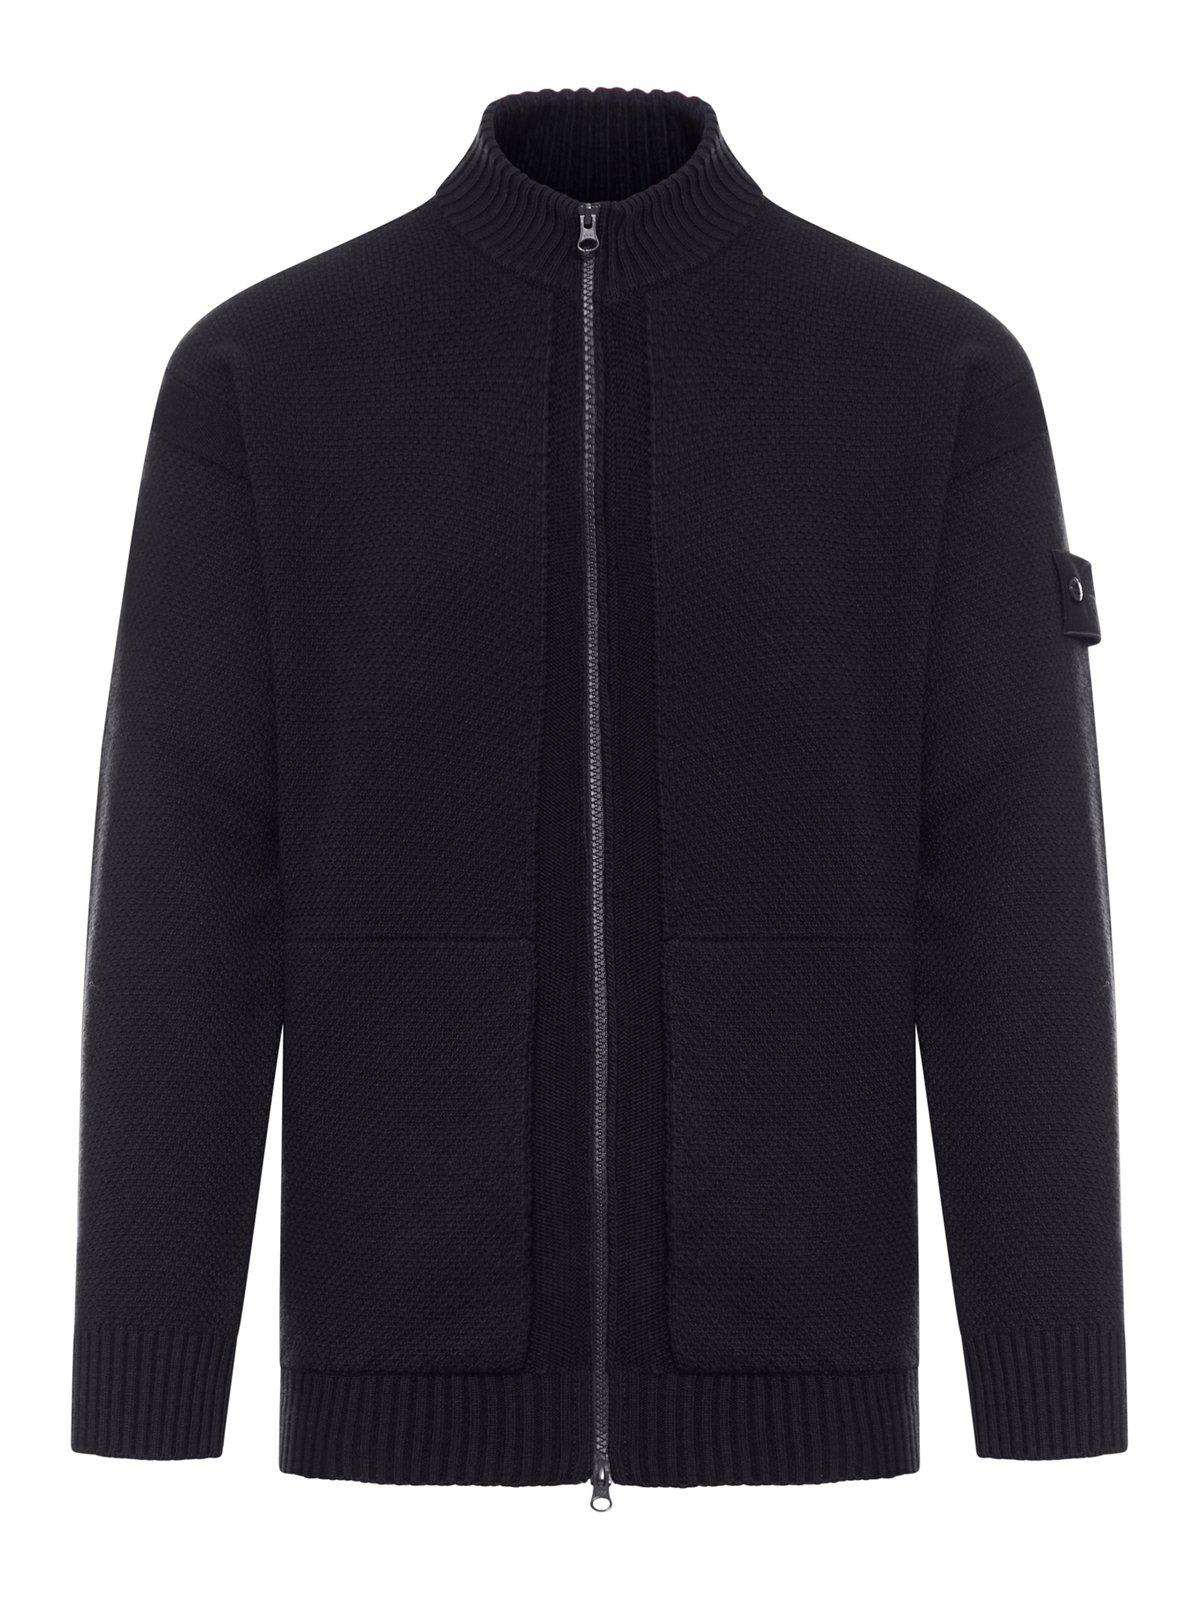 STONE ISLAND LOGO PATCH ZIP-UP KNITTED CARDIGAN